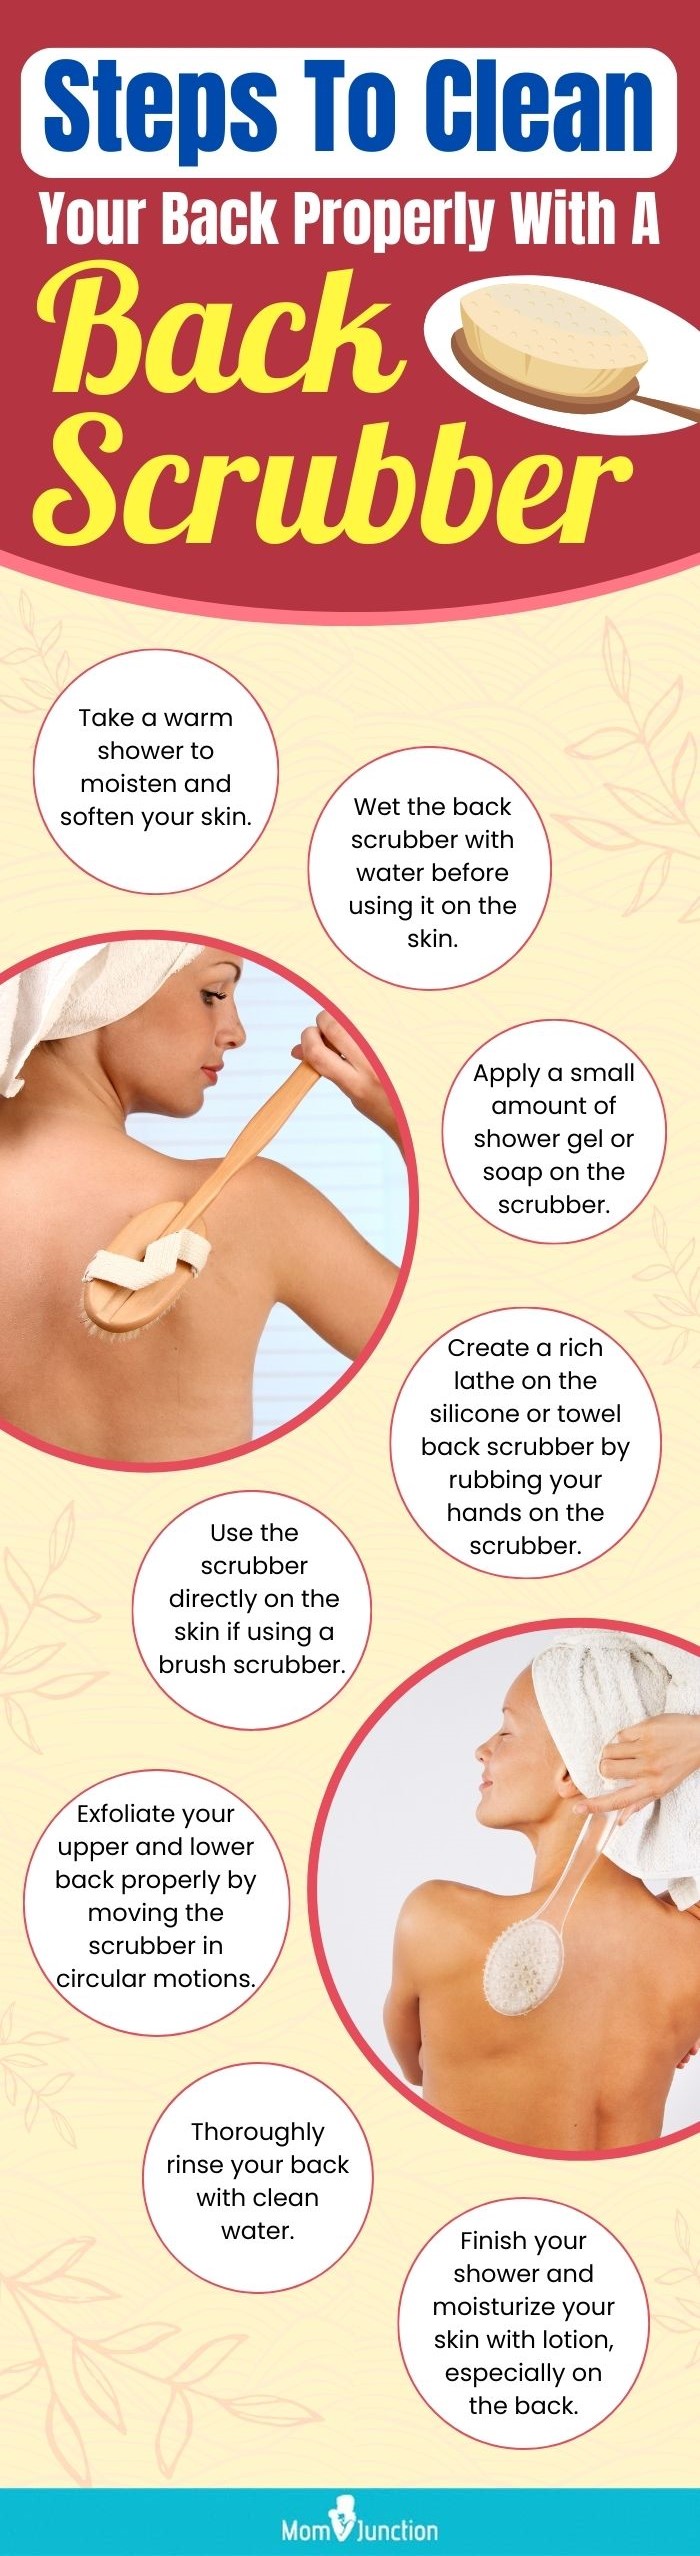 Steps To Clean Your Back Properly With A Back Scrubber (infographic)